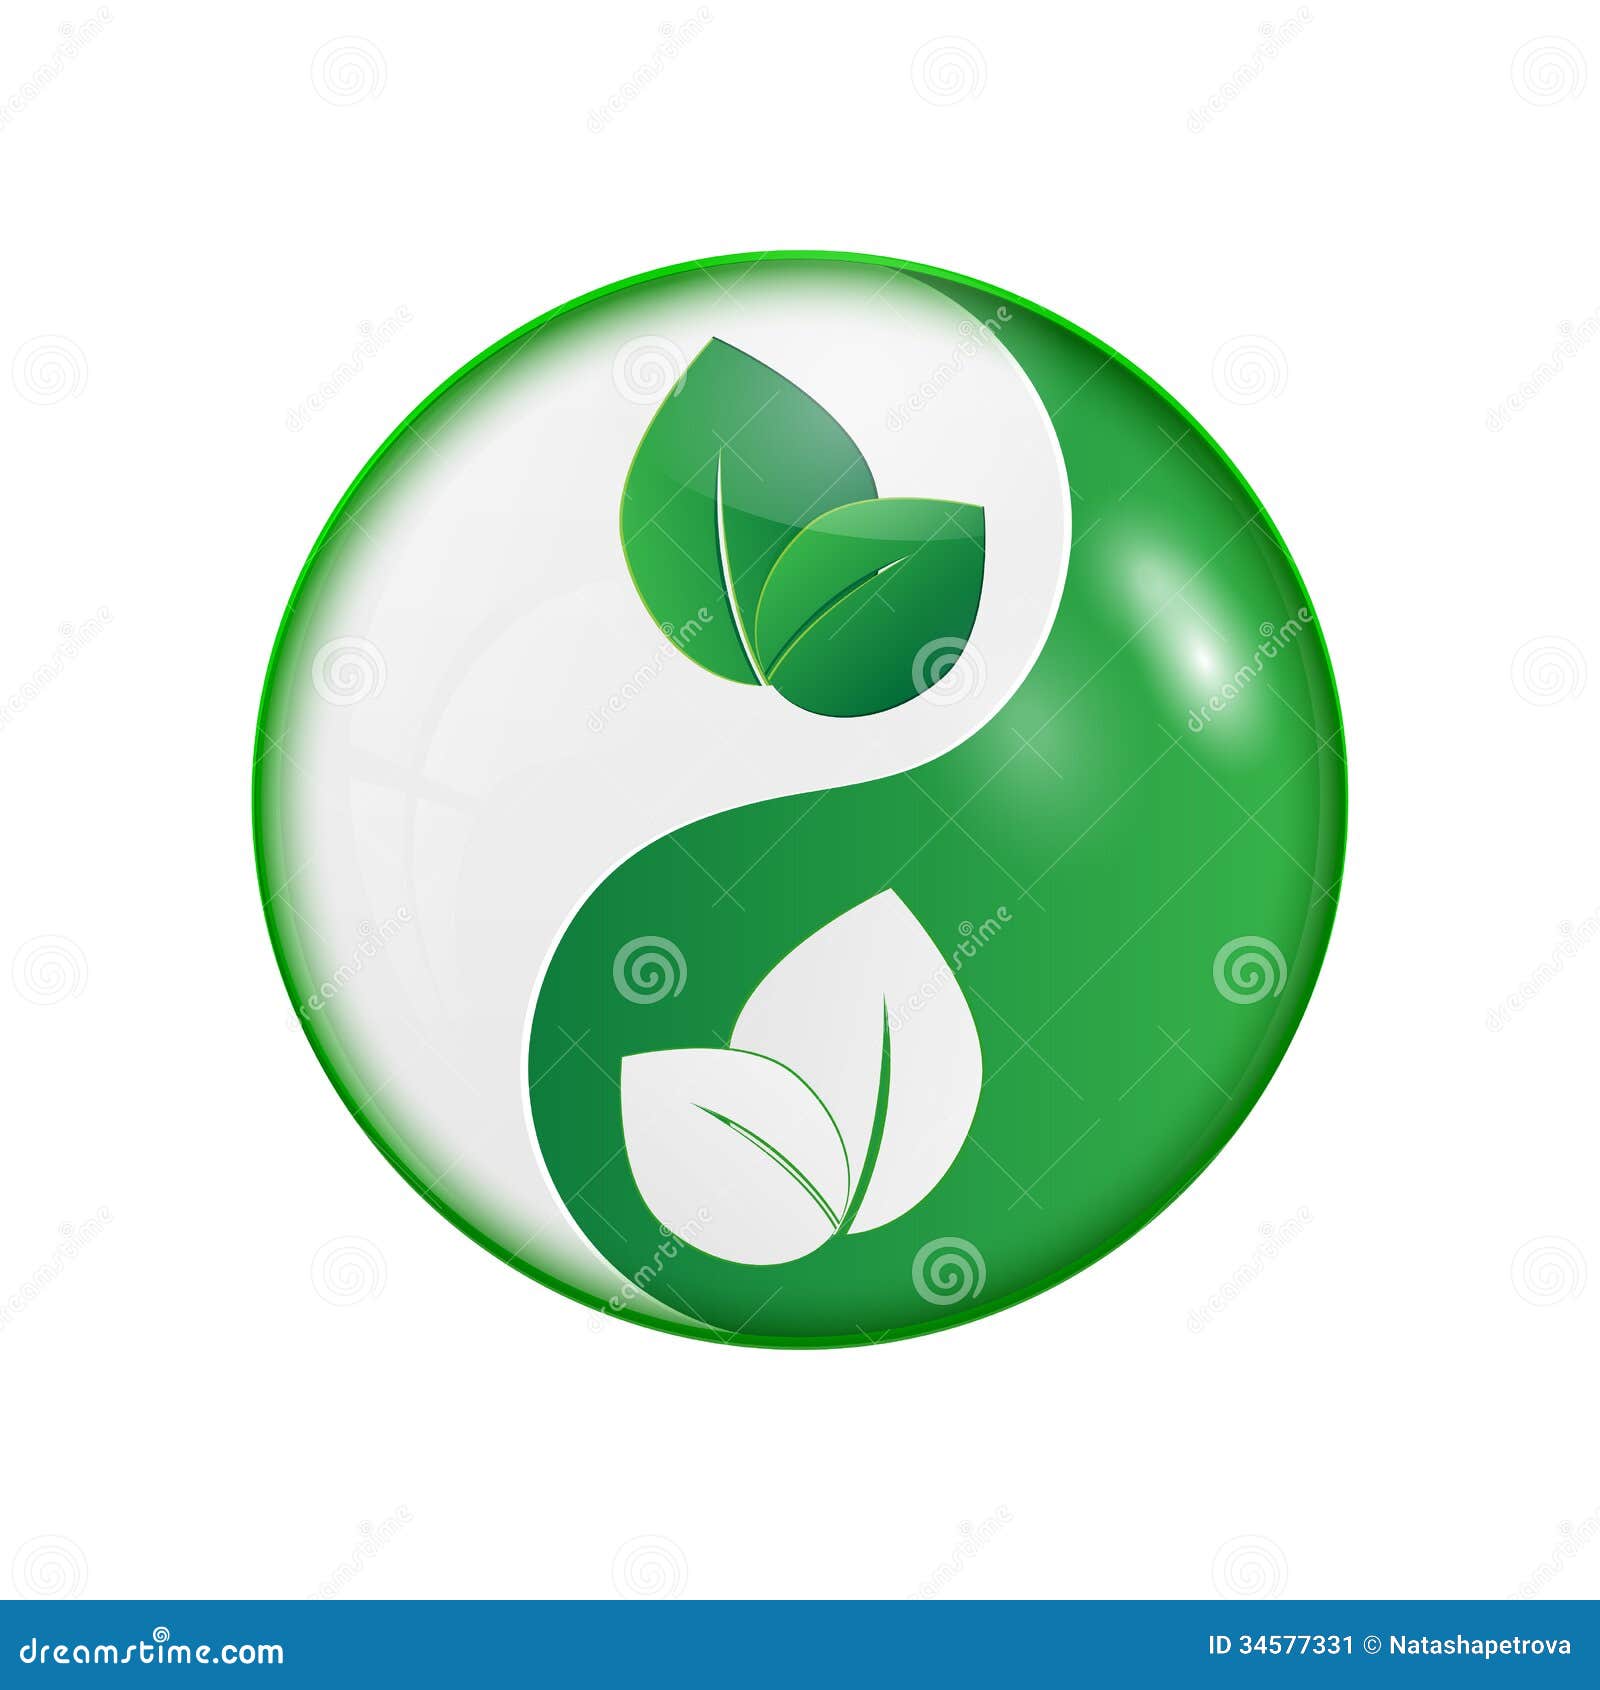 Ying yang stock vector. Image of east, contrary, icon